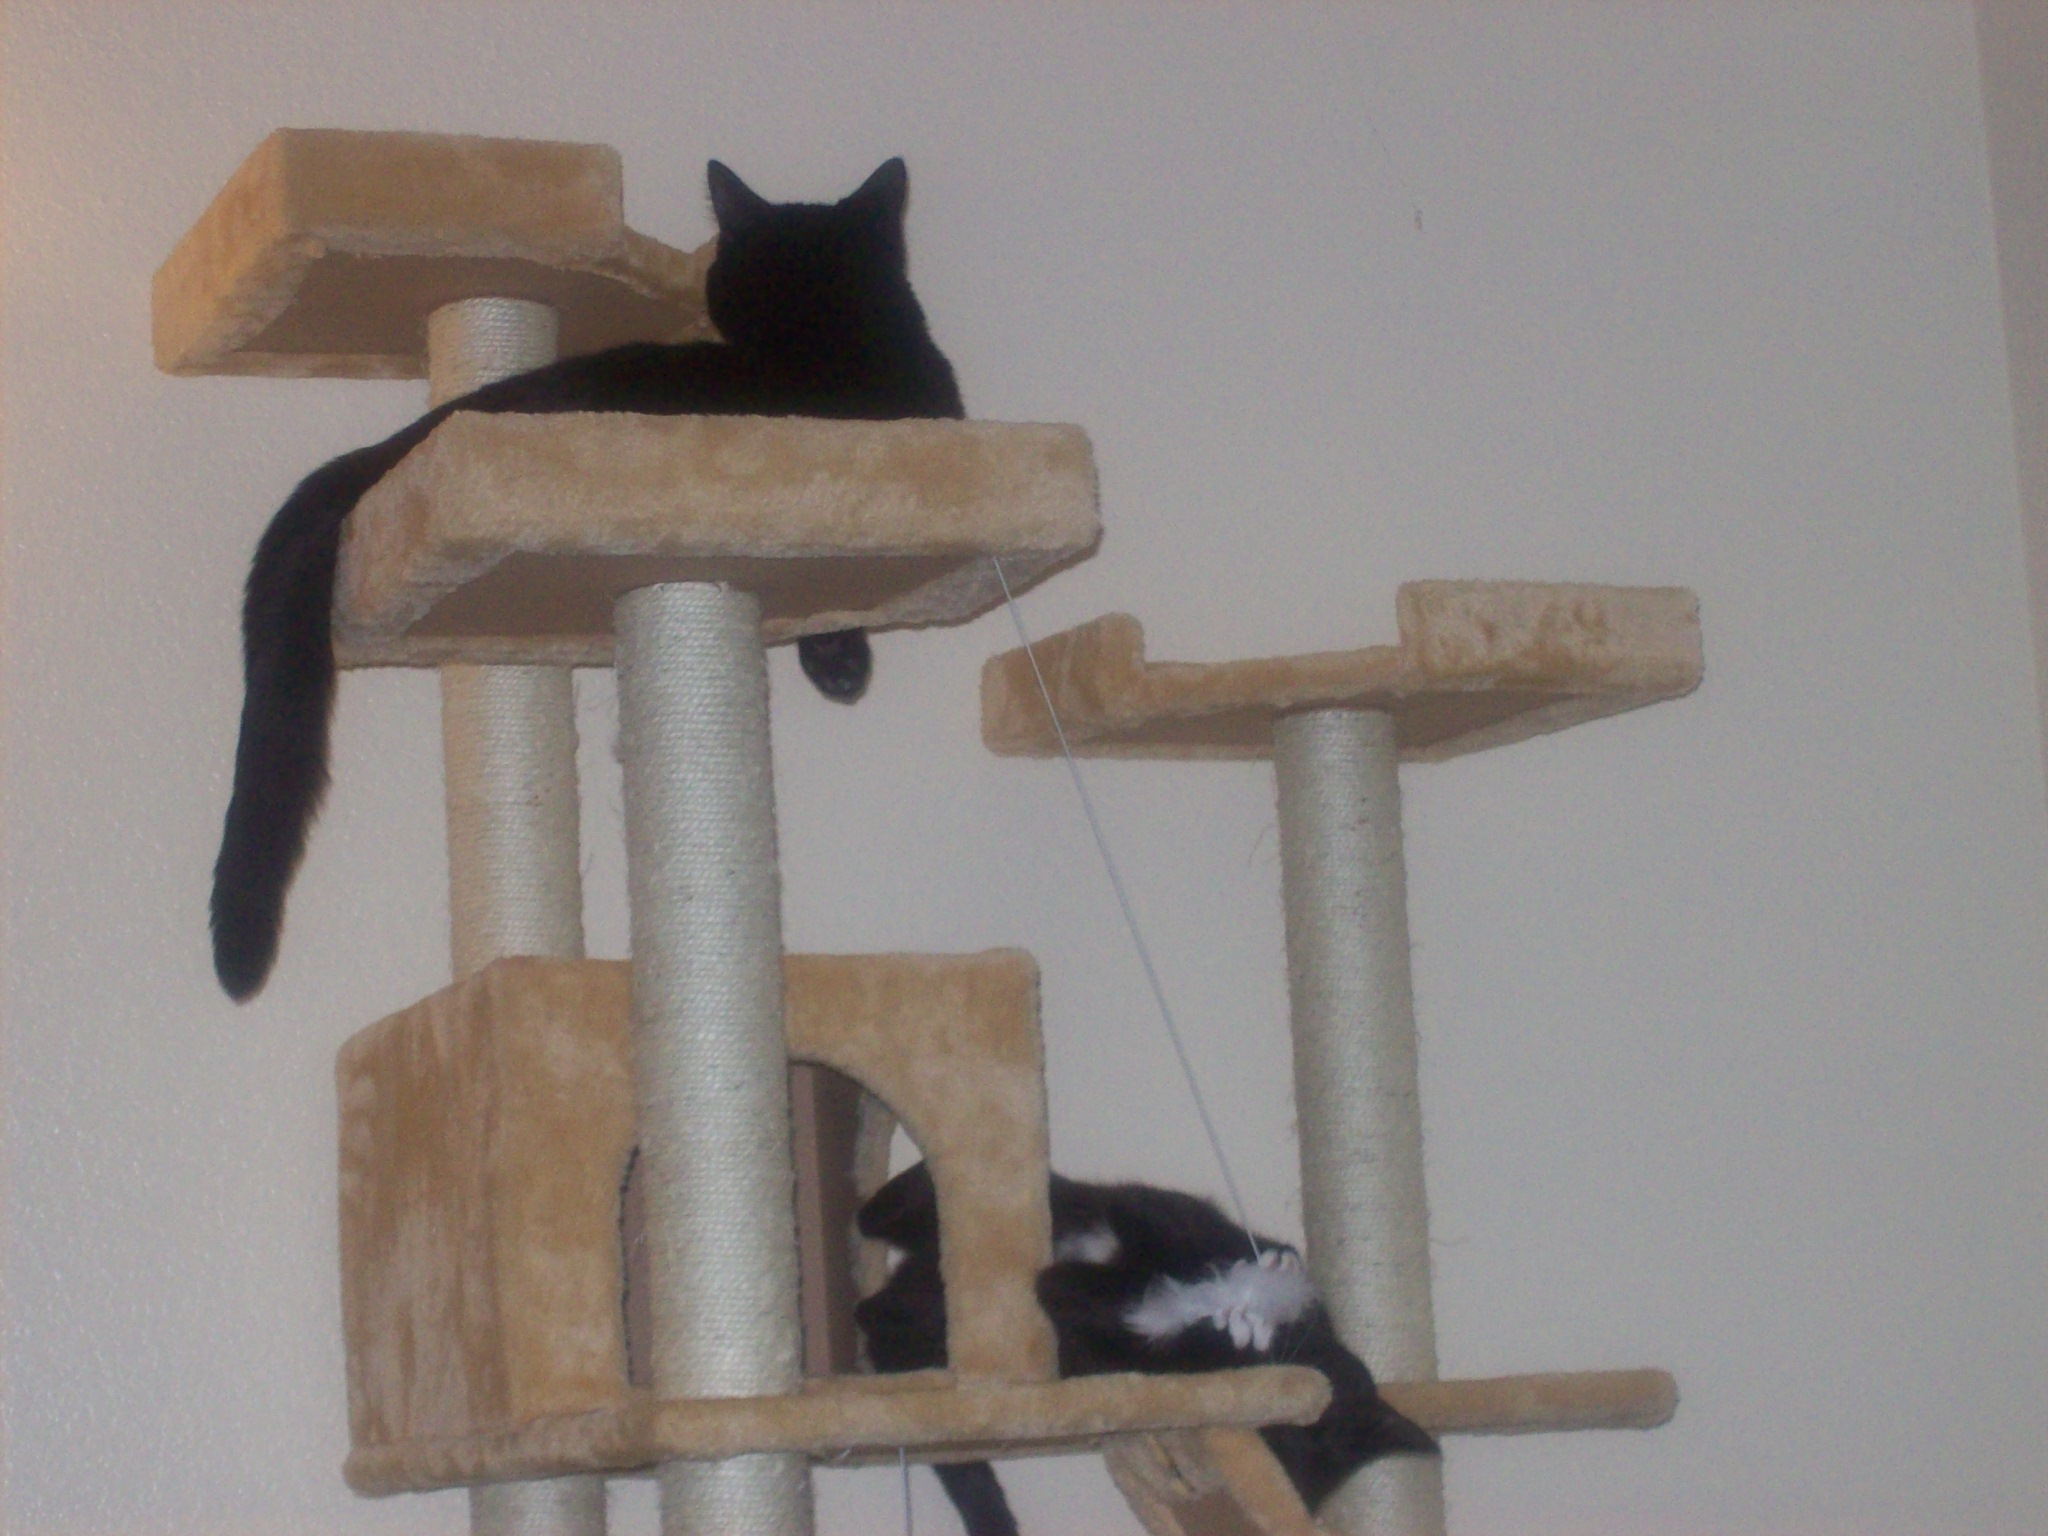 They love their cat tree <3